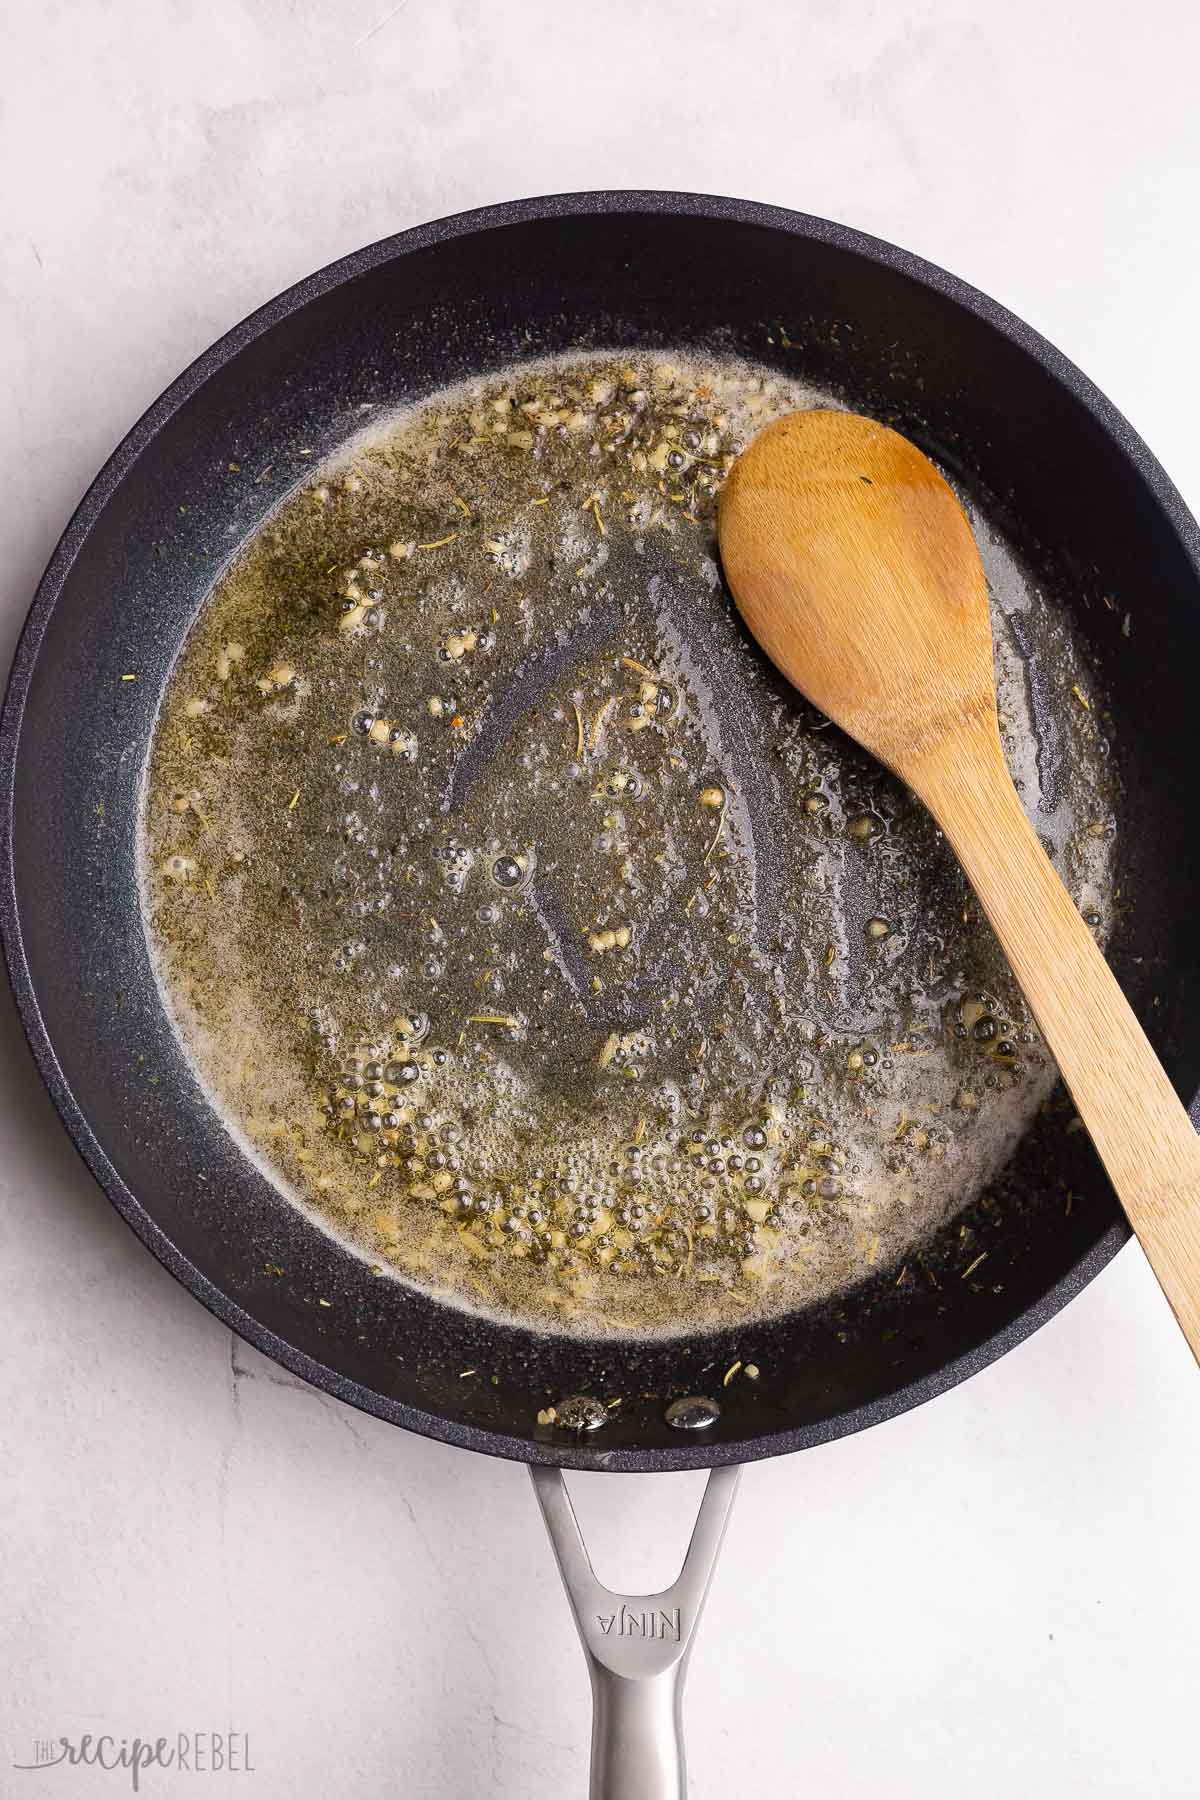 butter and garlic in black skillet.